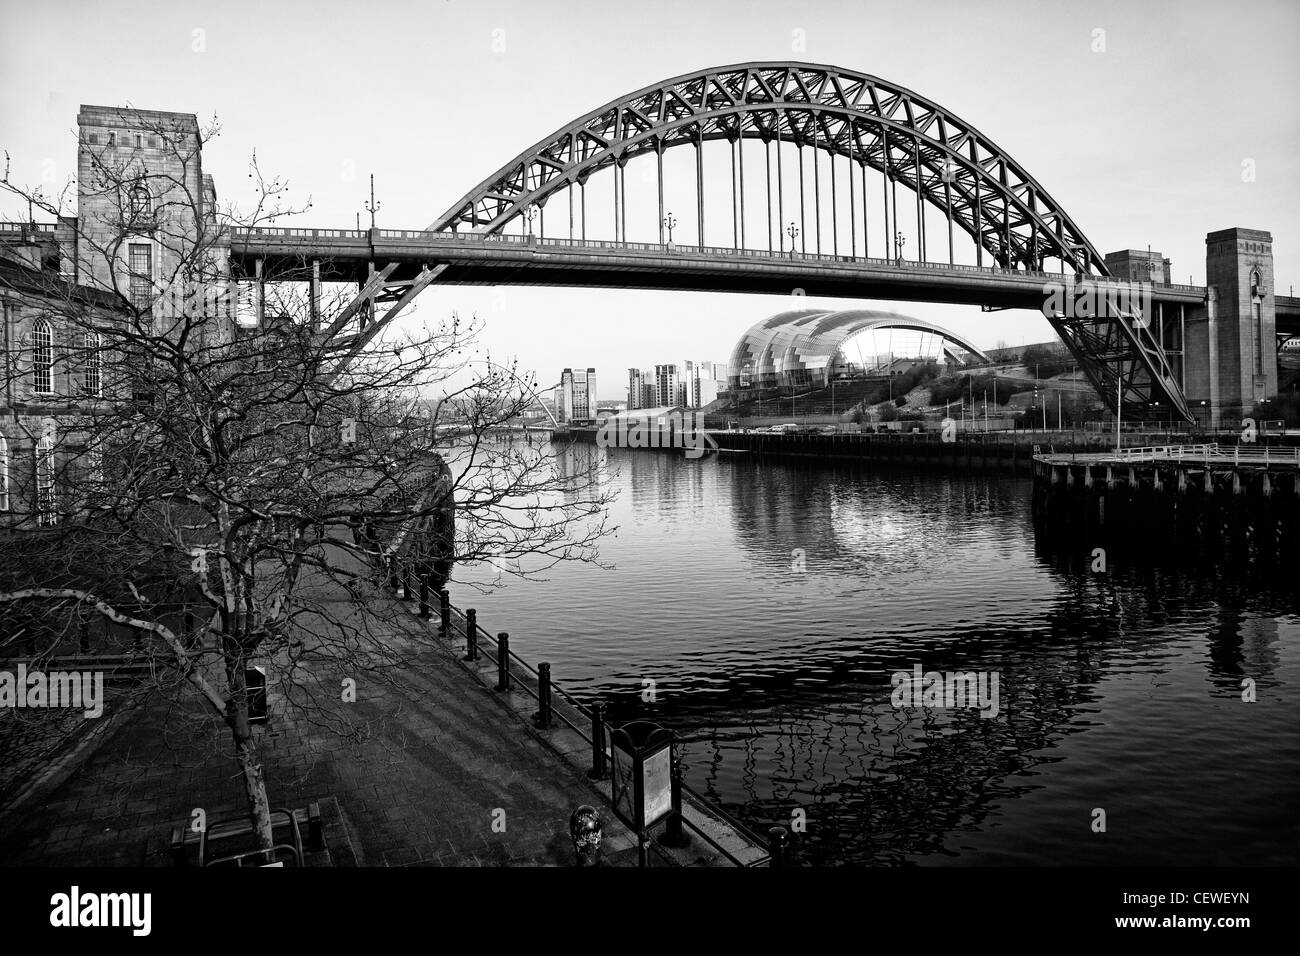 Tyne Bridge taken from the Newcastle side with Sage, the Baltic and the Millenium Bridge over River Tyne, Newcastle-upon-Tyne Stock Photo